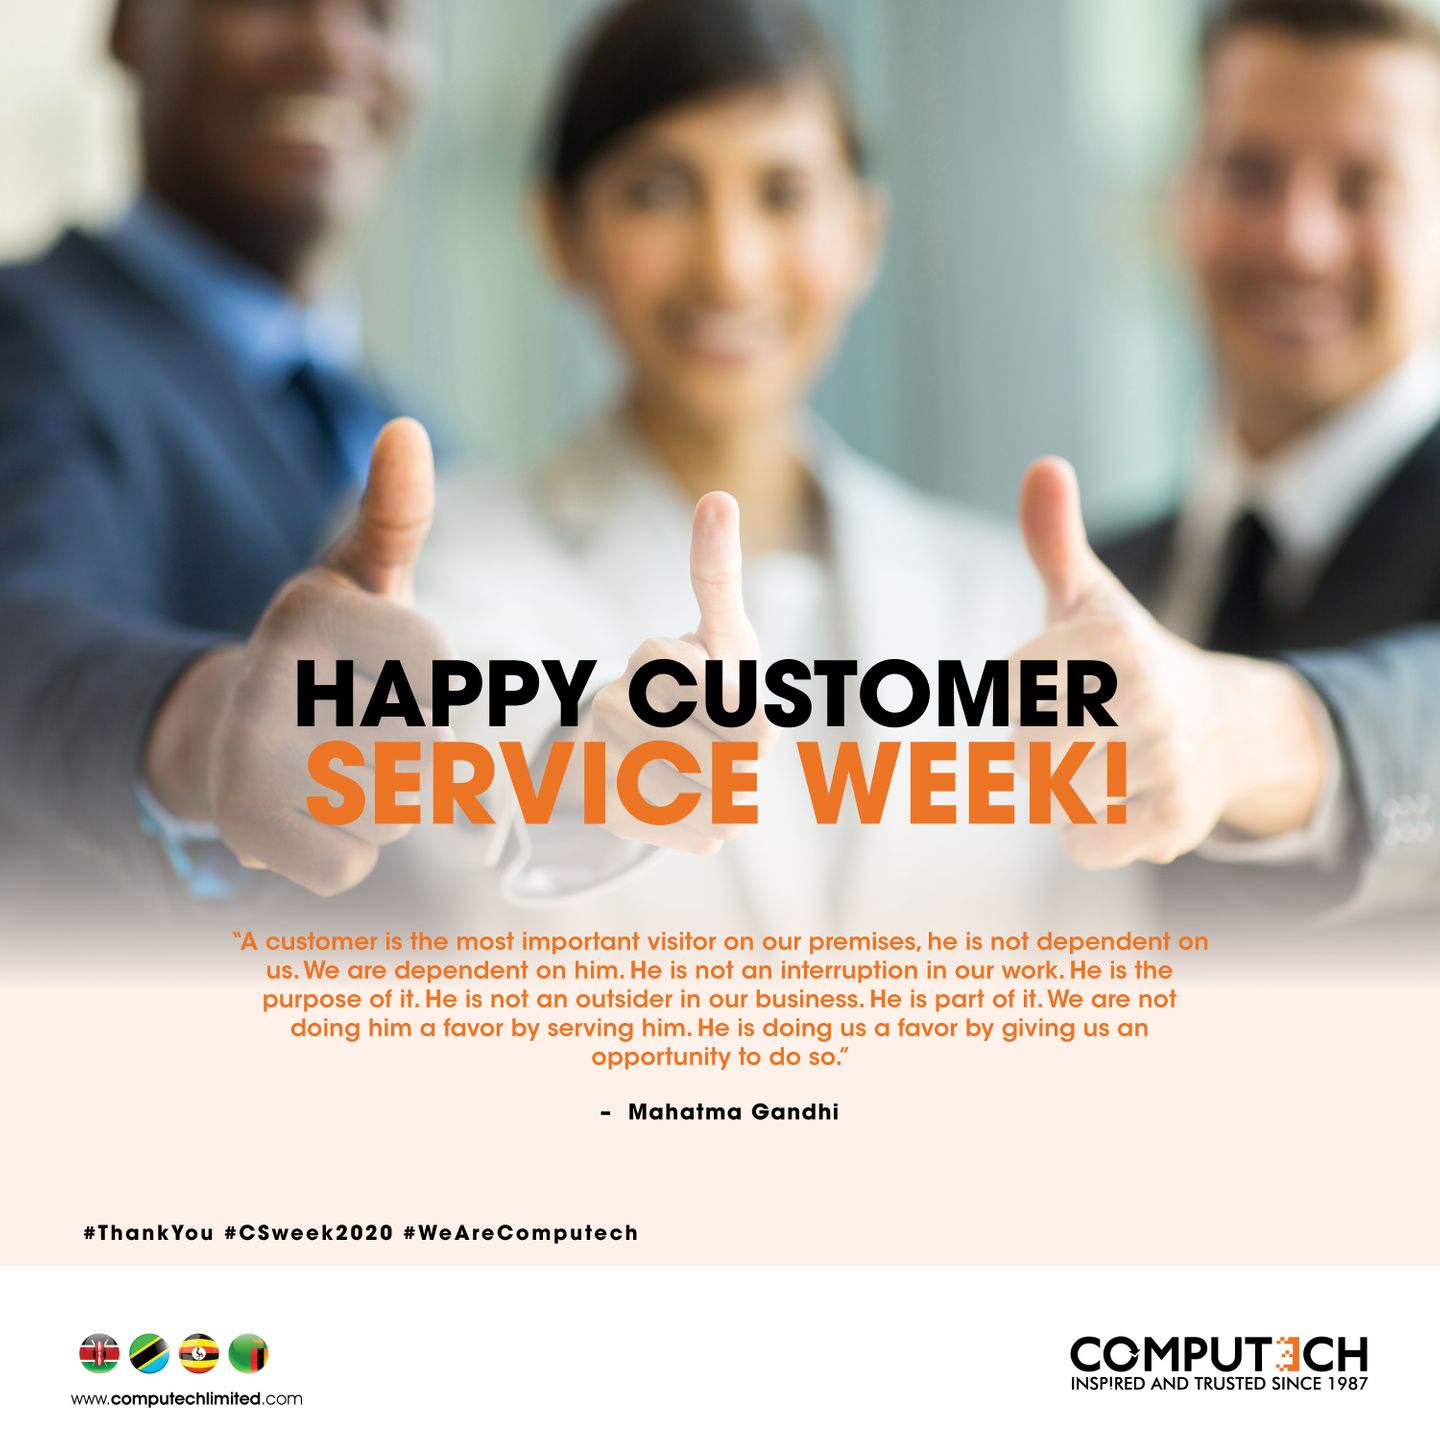 Computech Limited Wishes you a Happy Customer Service Week! 